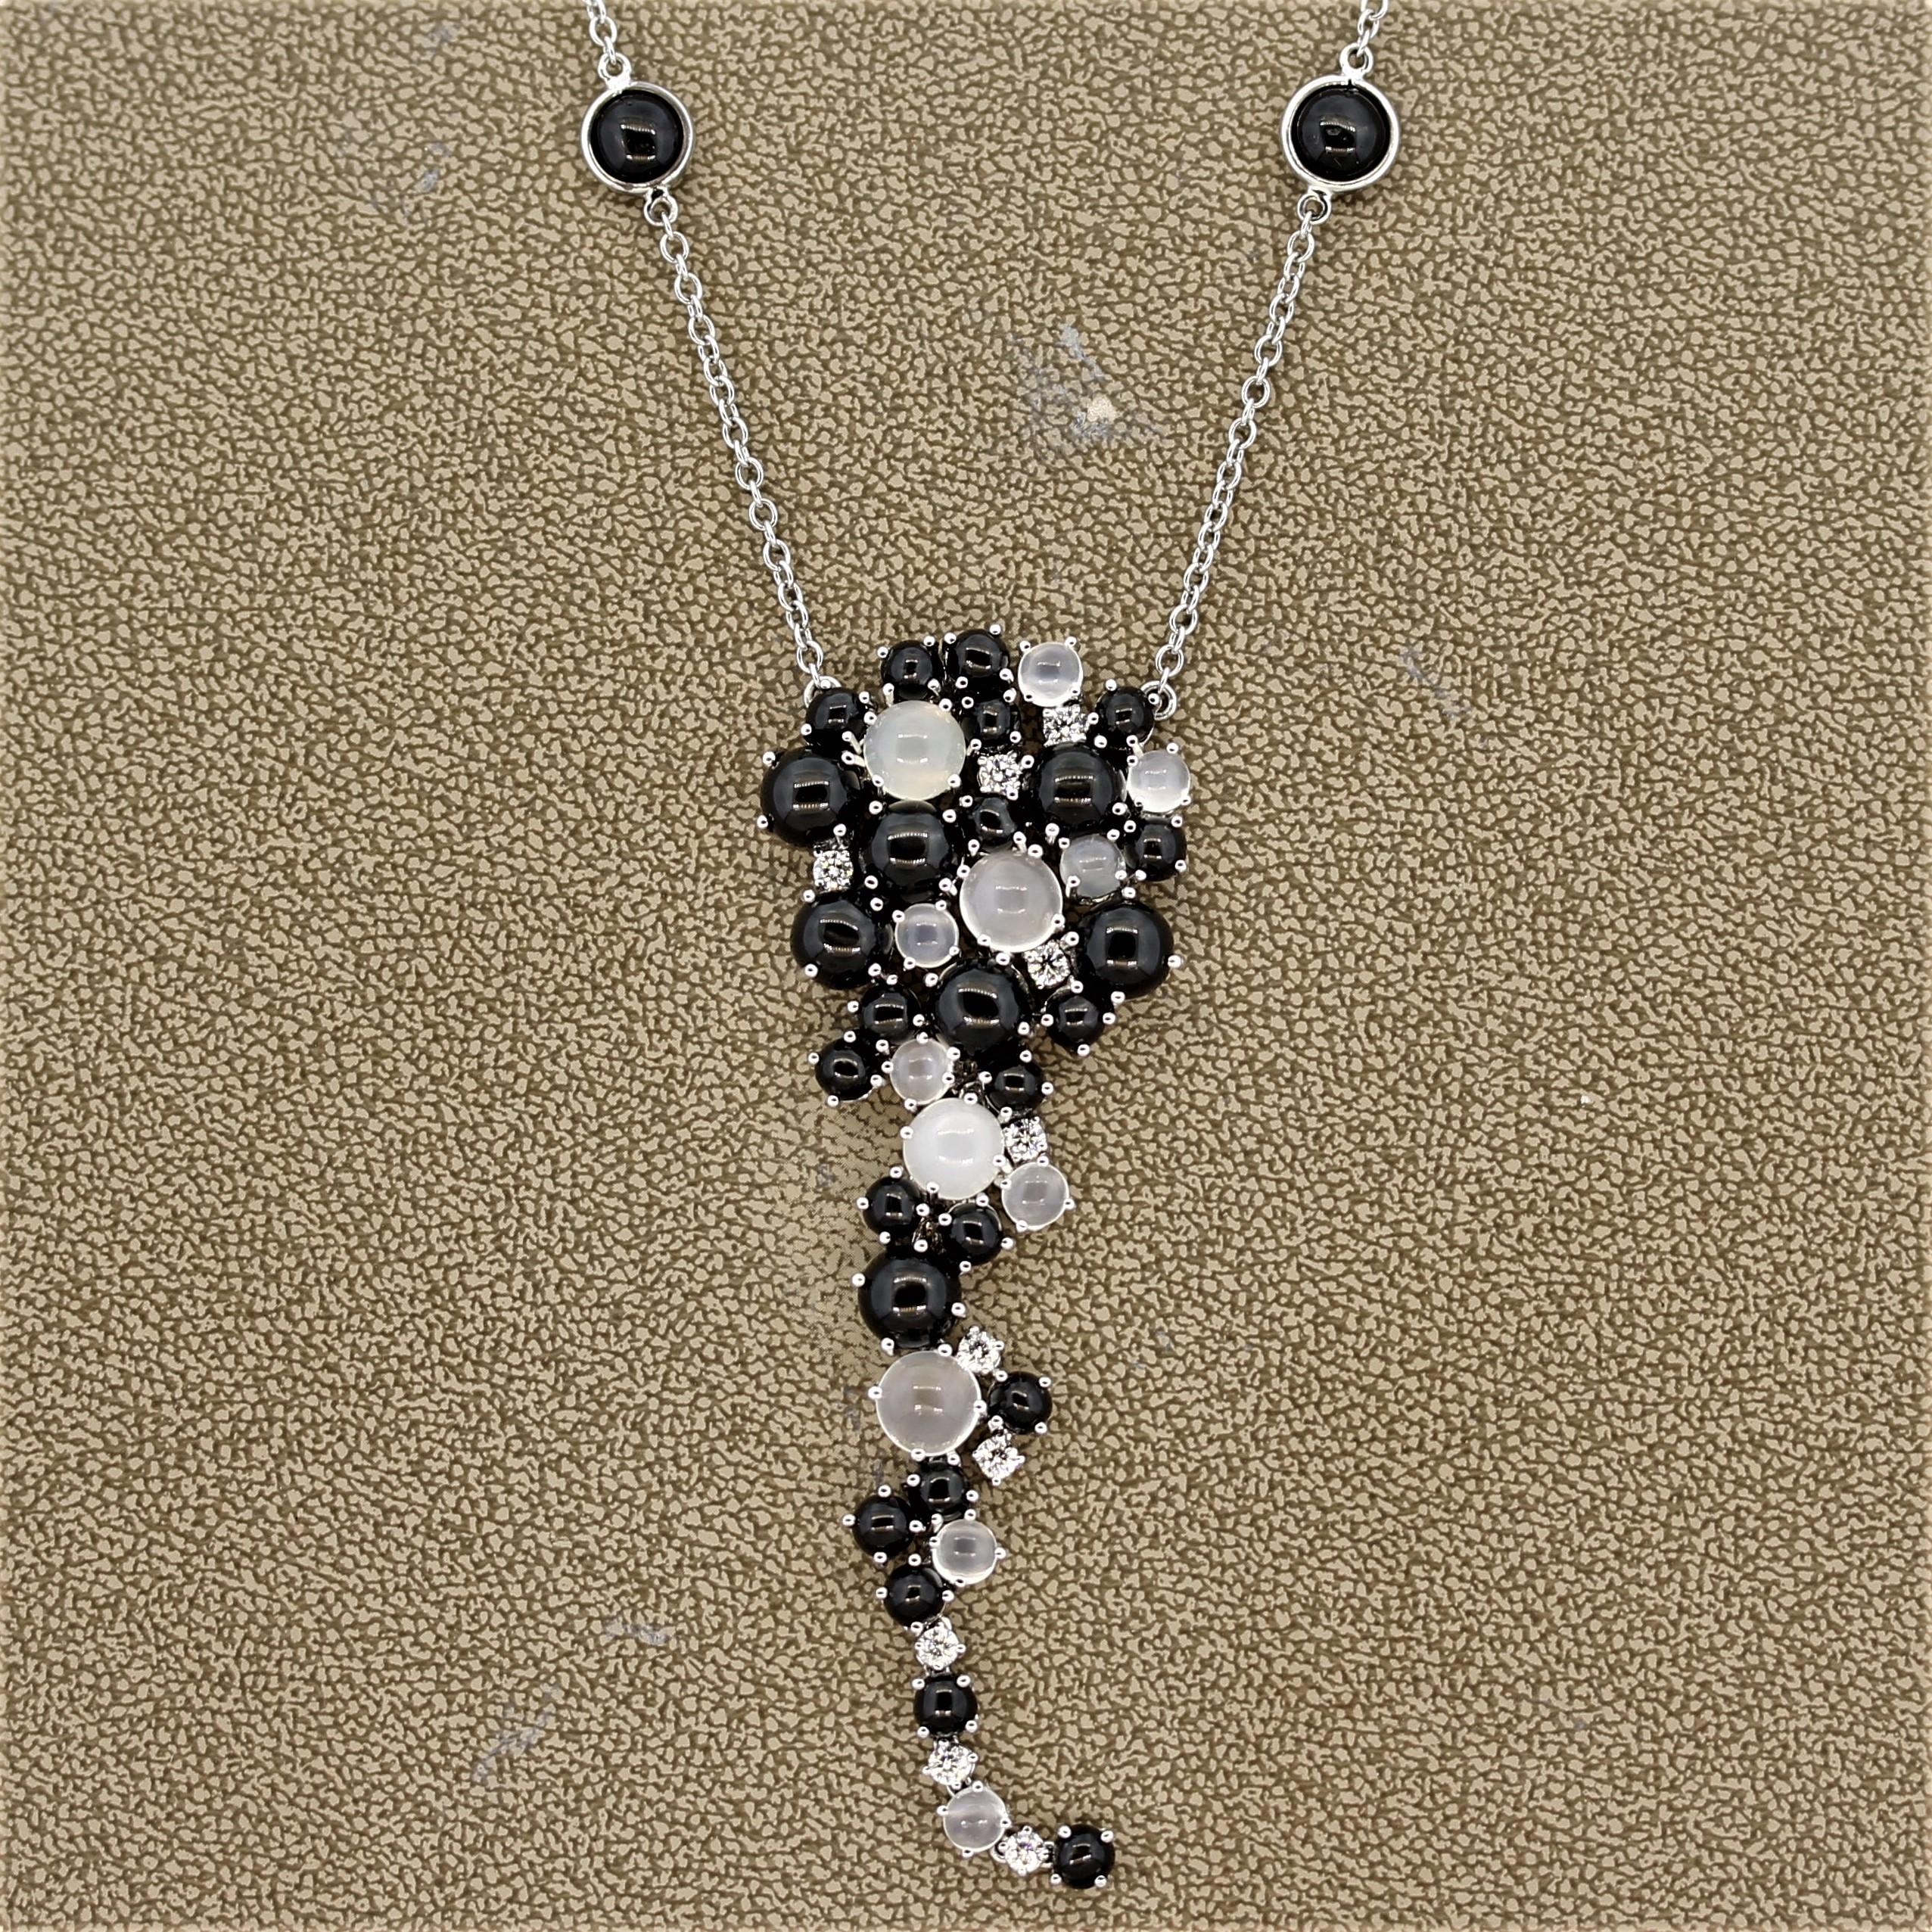 Wow! An Italian made necklace featuring 2 unique gemstones with special phenomenon. They include bright moonstones with a cats eye effect, known as chatoyancy, and black diopside showing a 4 rayed star, known as asterism. The moonstones and diopside